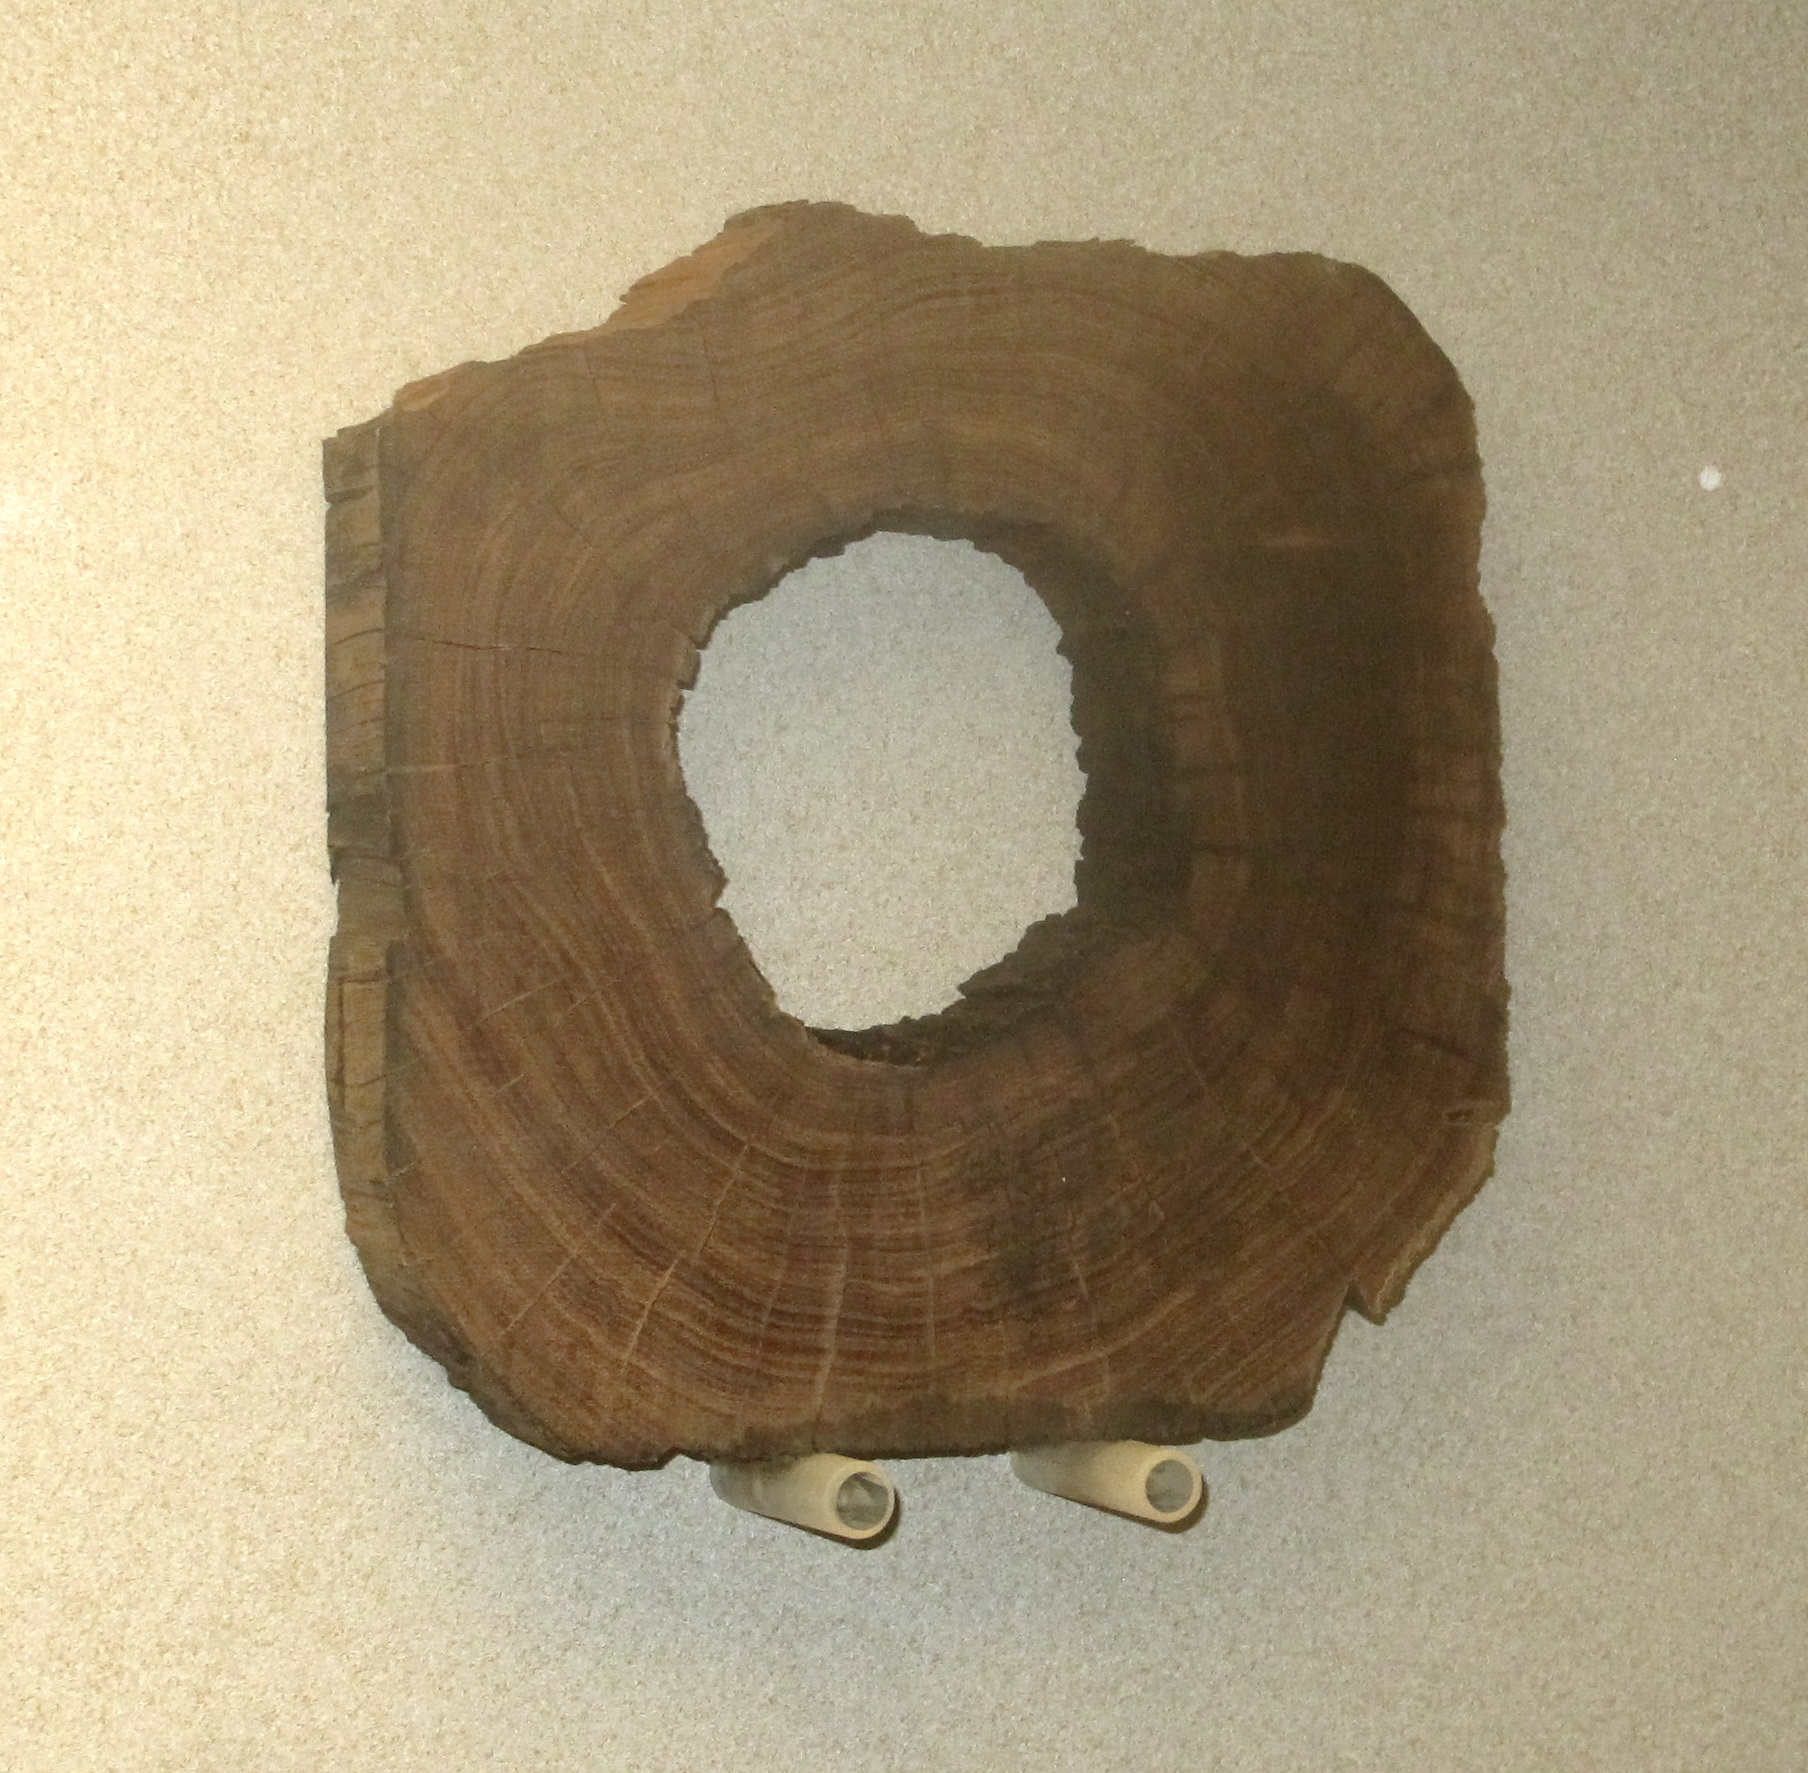 Section of pump shaft excavated from Wynyard Square in 1827